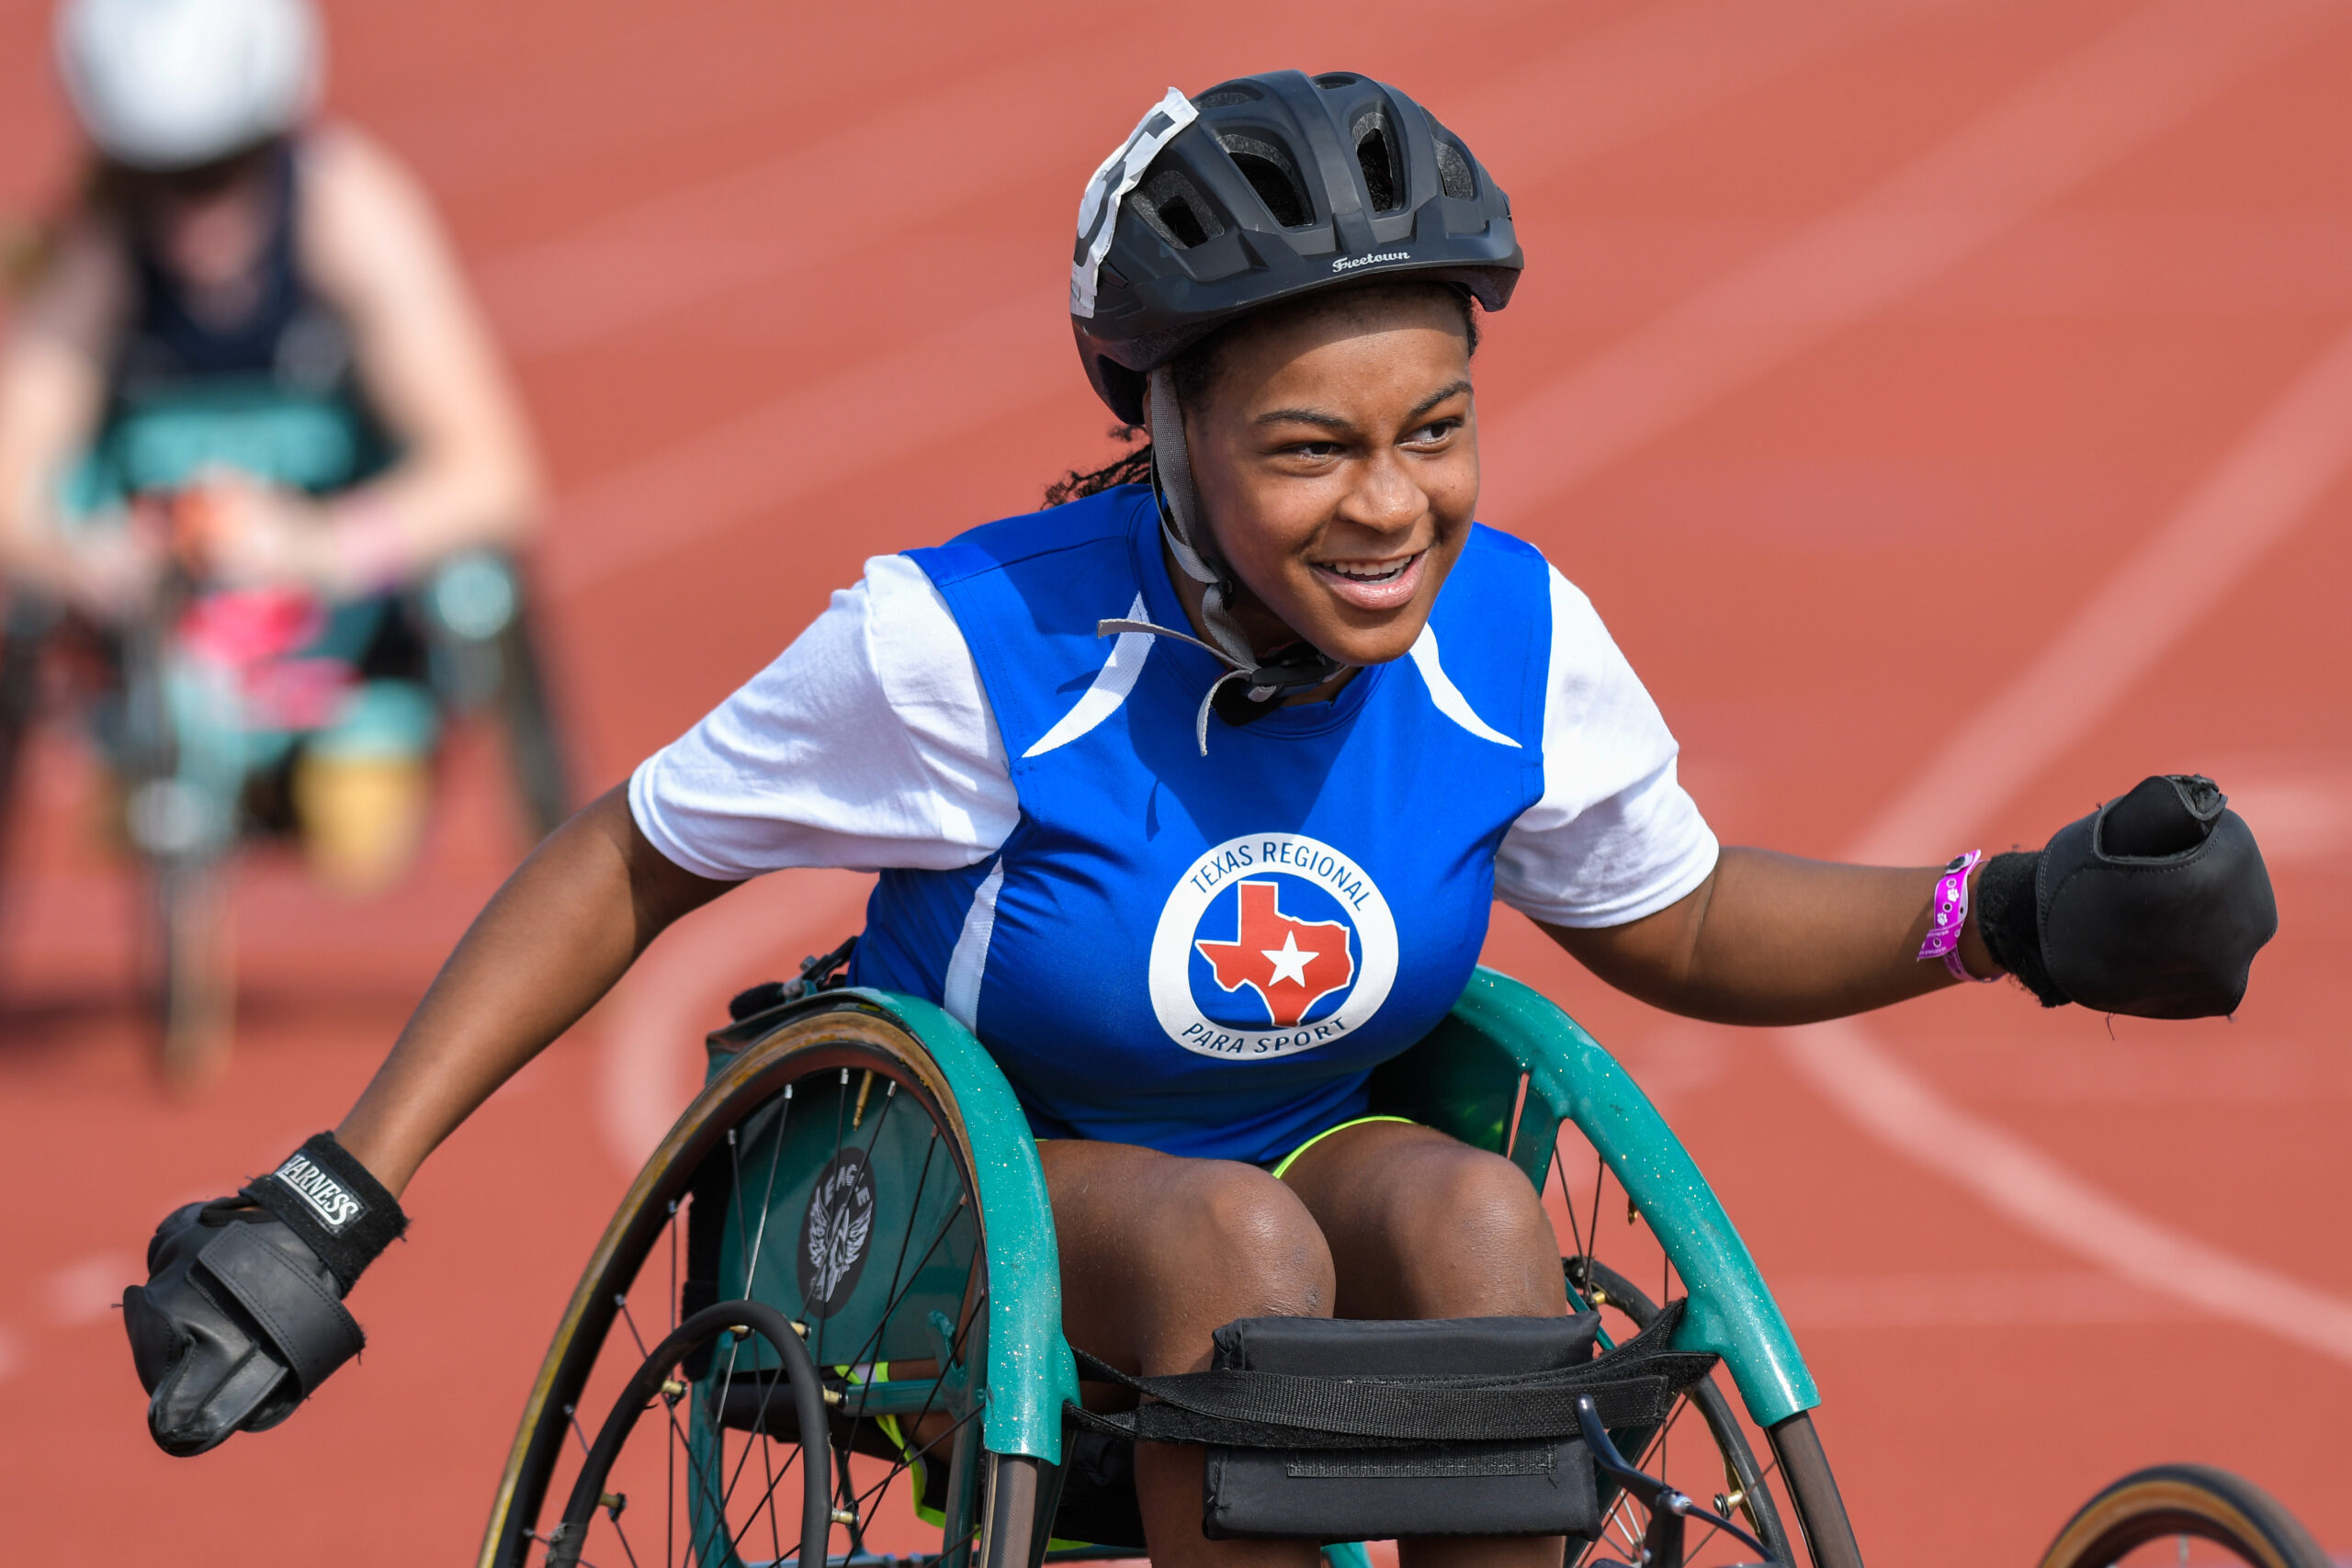 Female athlete in a racing wheelchair smiling